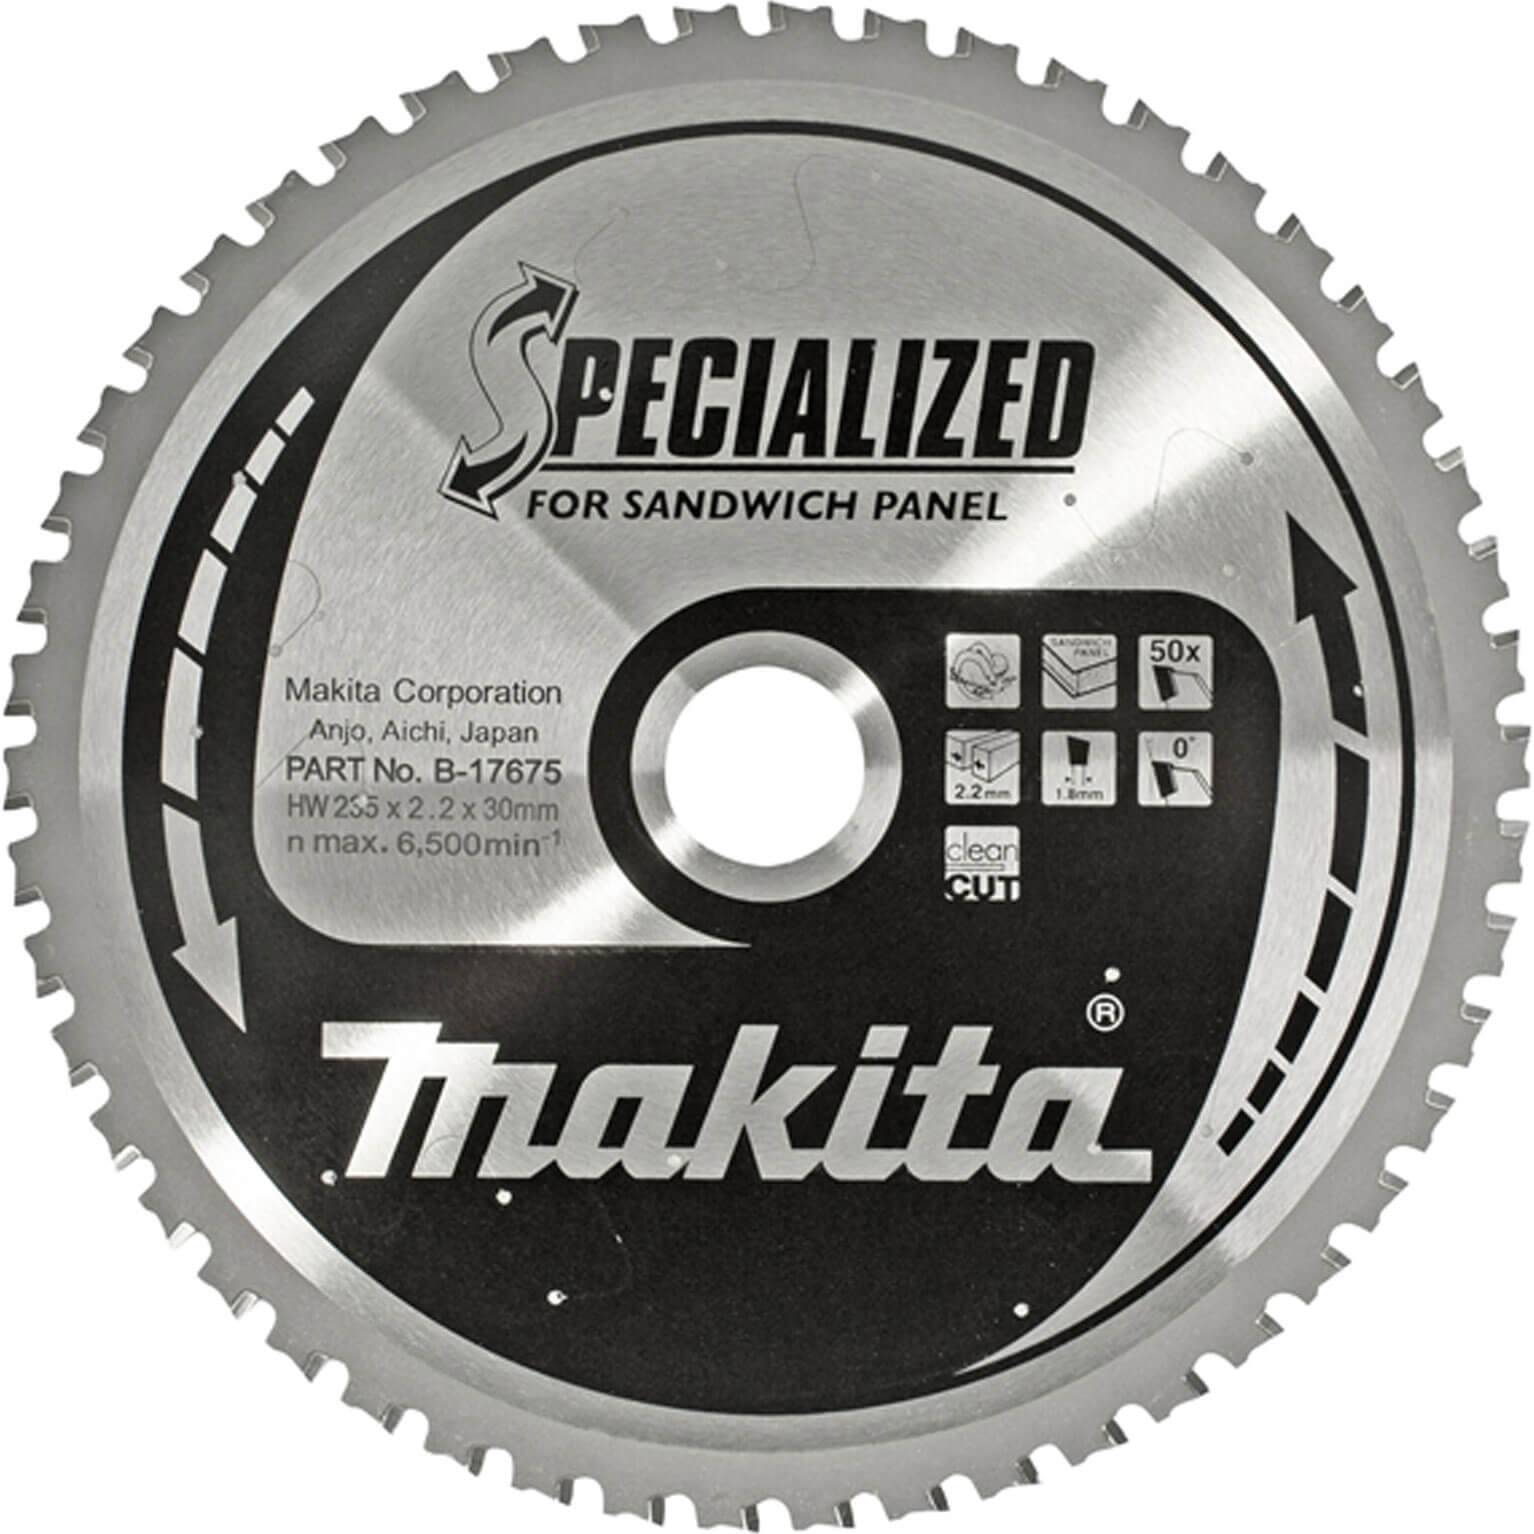 Photos - Power Tool Accessory Makita SPECIALIZED Sandwich Panel Cutting Saw Blade 355mm 80T 30mm B-17697 